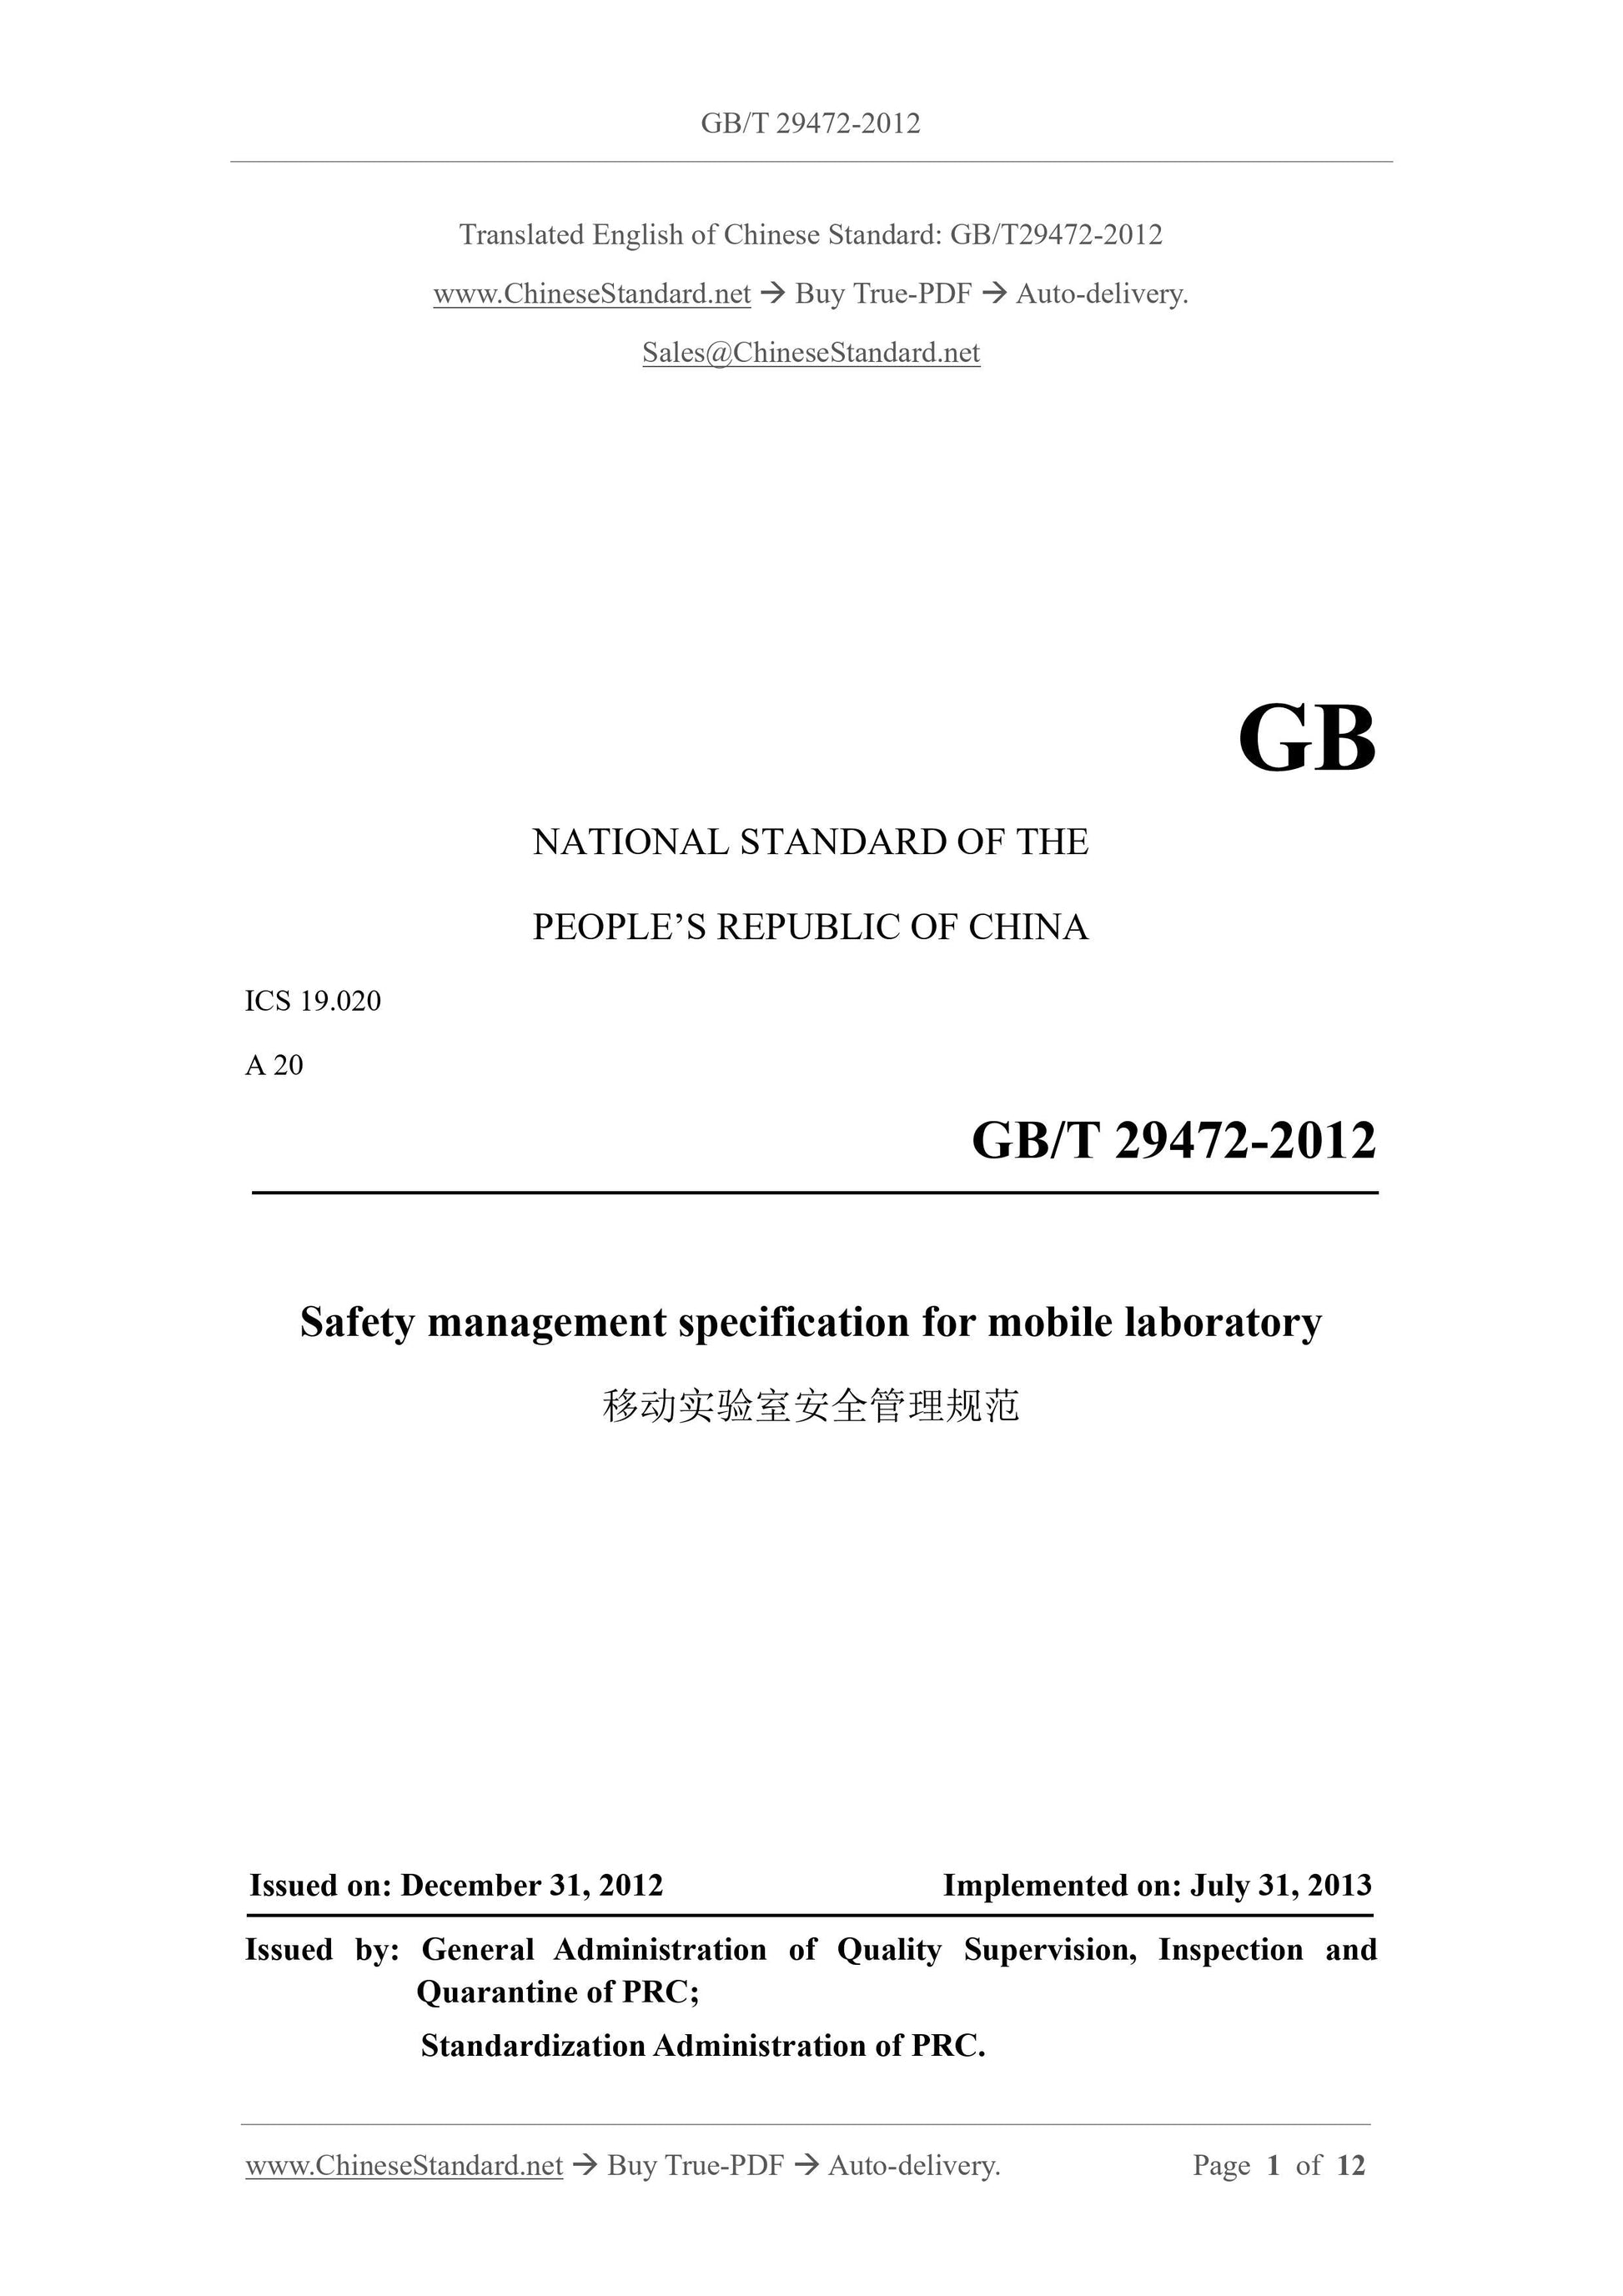 GB/T 29472-2012 Page 1